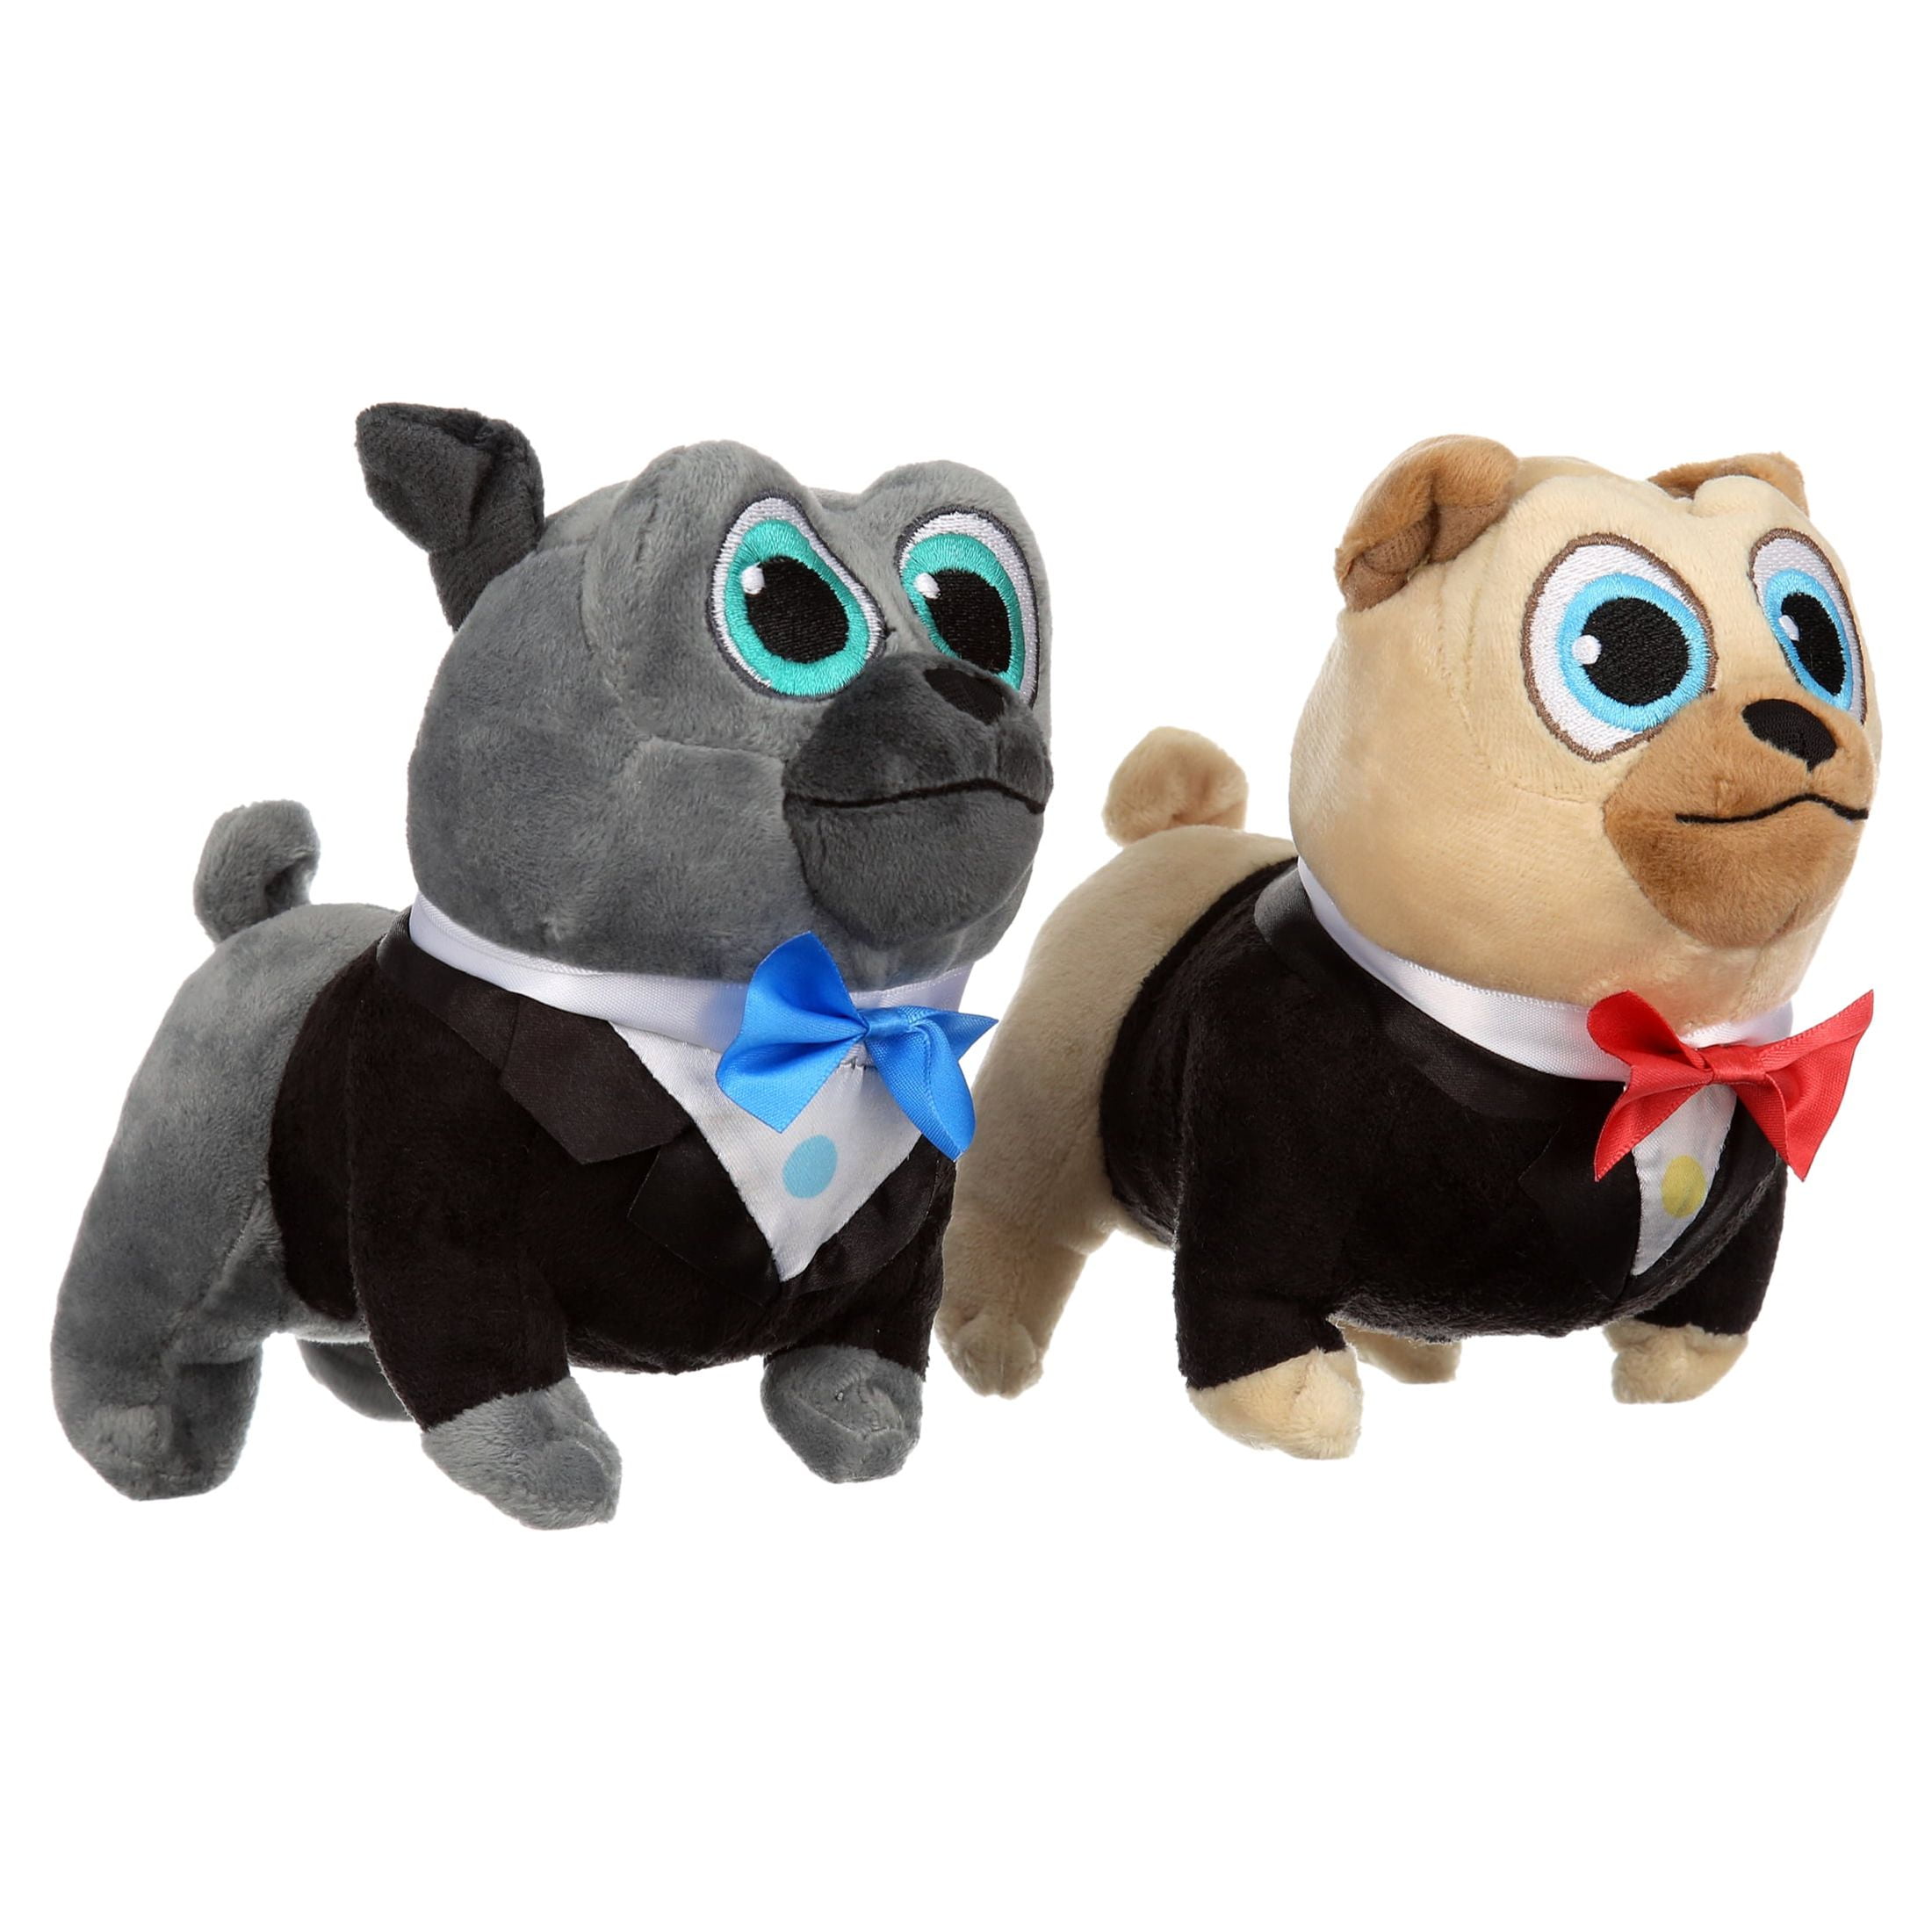 2-Count Puppy Dog Pals Small Plush Toy (Bingo & Rolly) $5.28 + Free S&H w/ Walmart+ or $35+